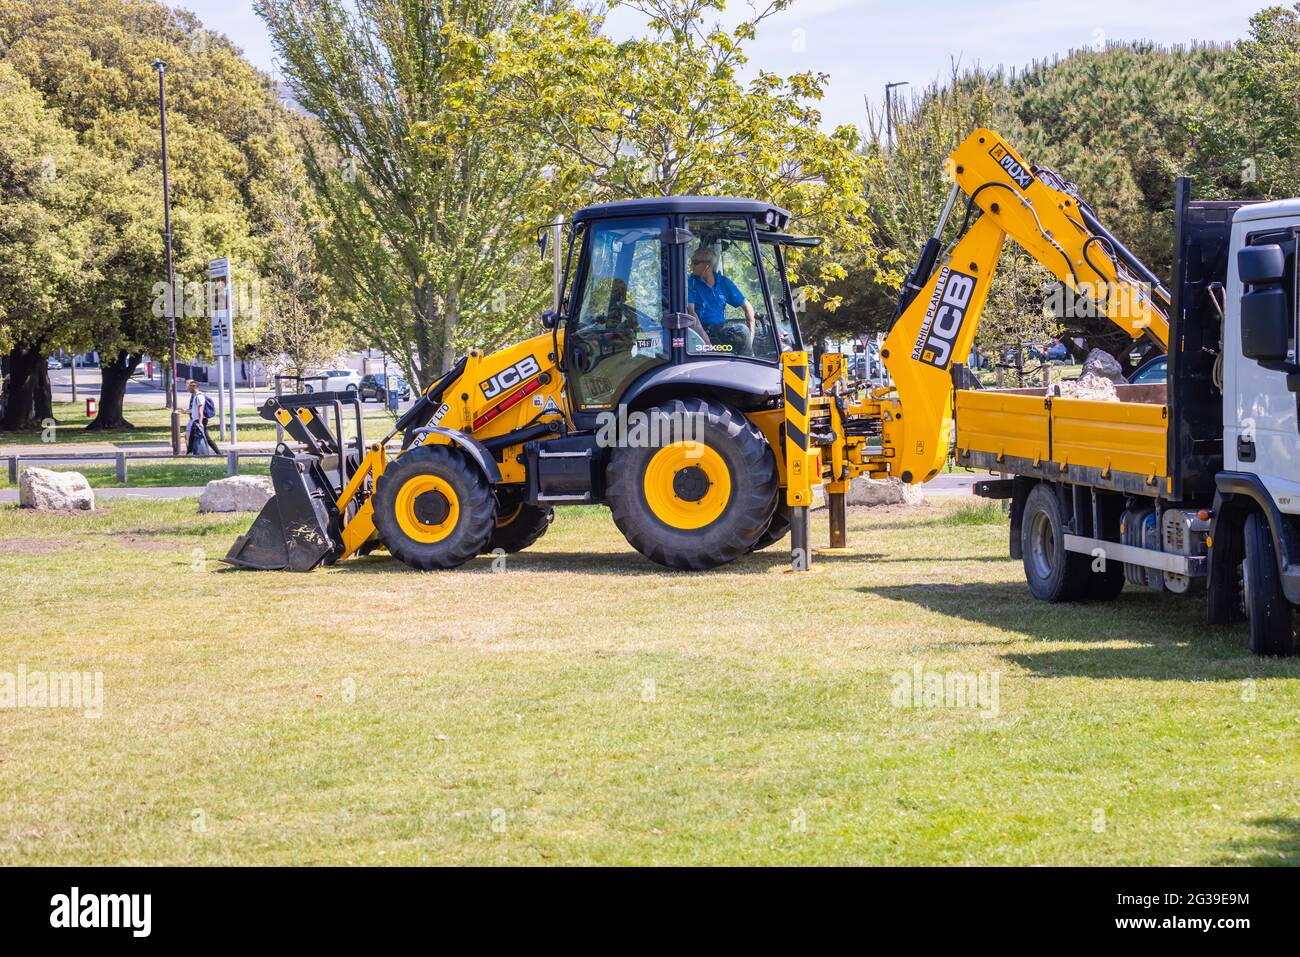 A yellow JCB 3CX Eco backhoe loader working in a park in Southsea, Portsmouth, Hampshire, south coast England with its stabilisers set down Stock Photo